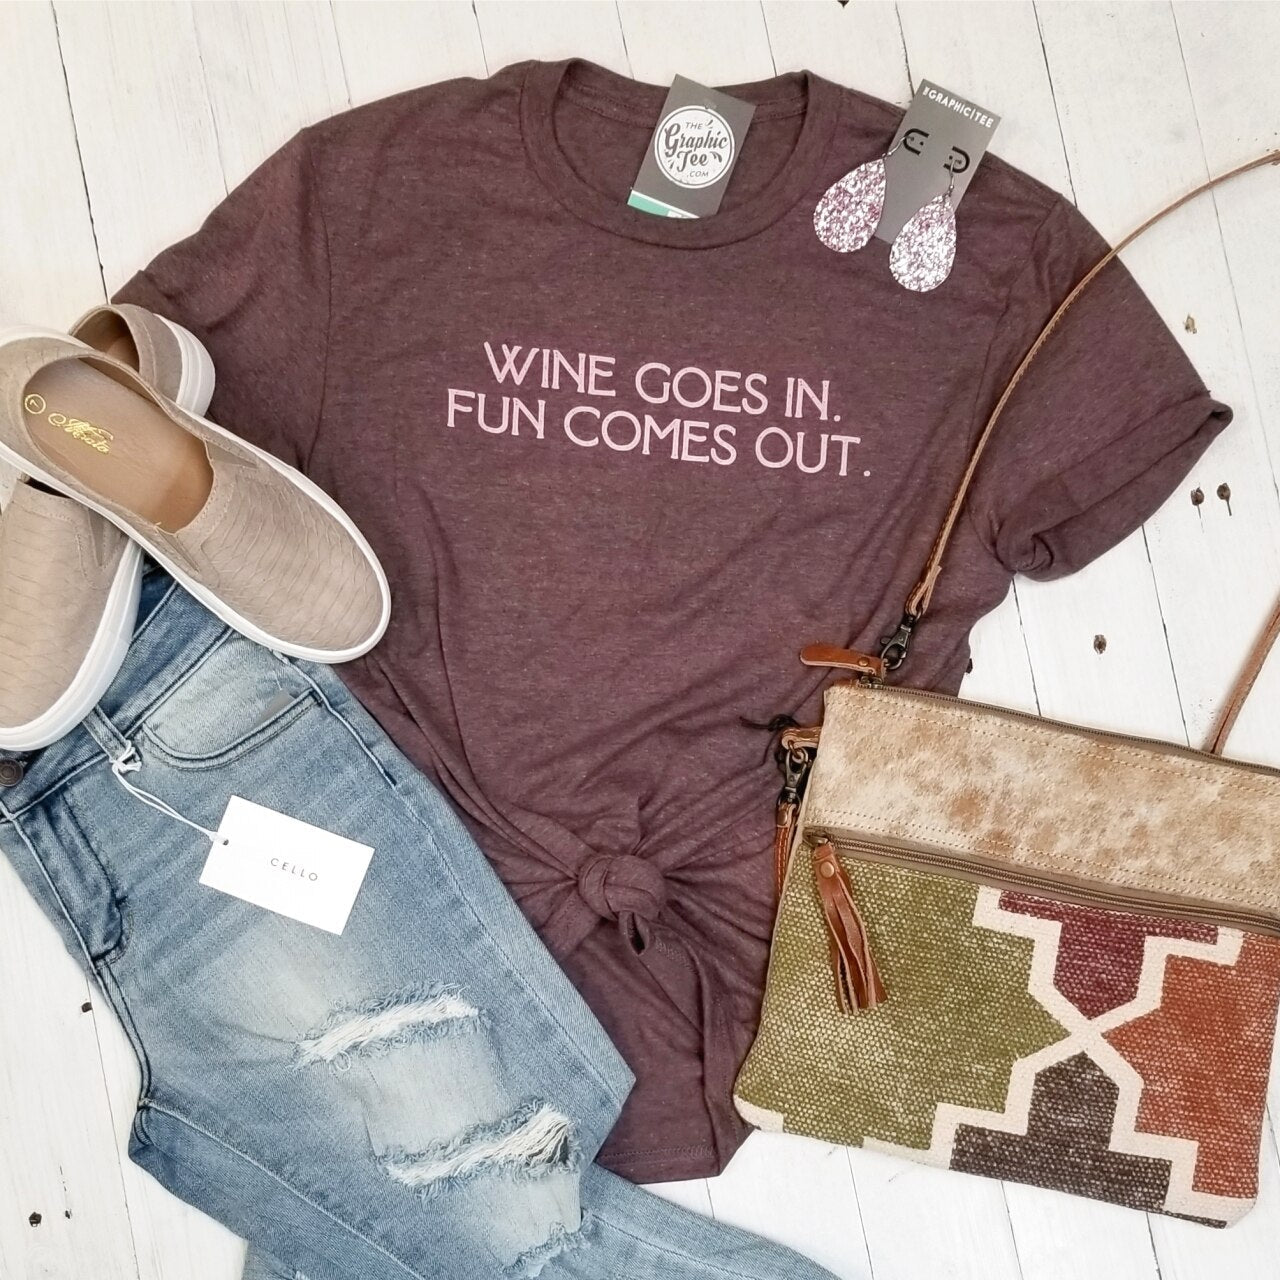 Wine Goes In. Fun Comes Out. - Adult Tee - The Graphic Tee